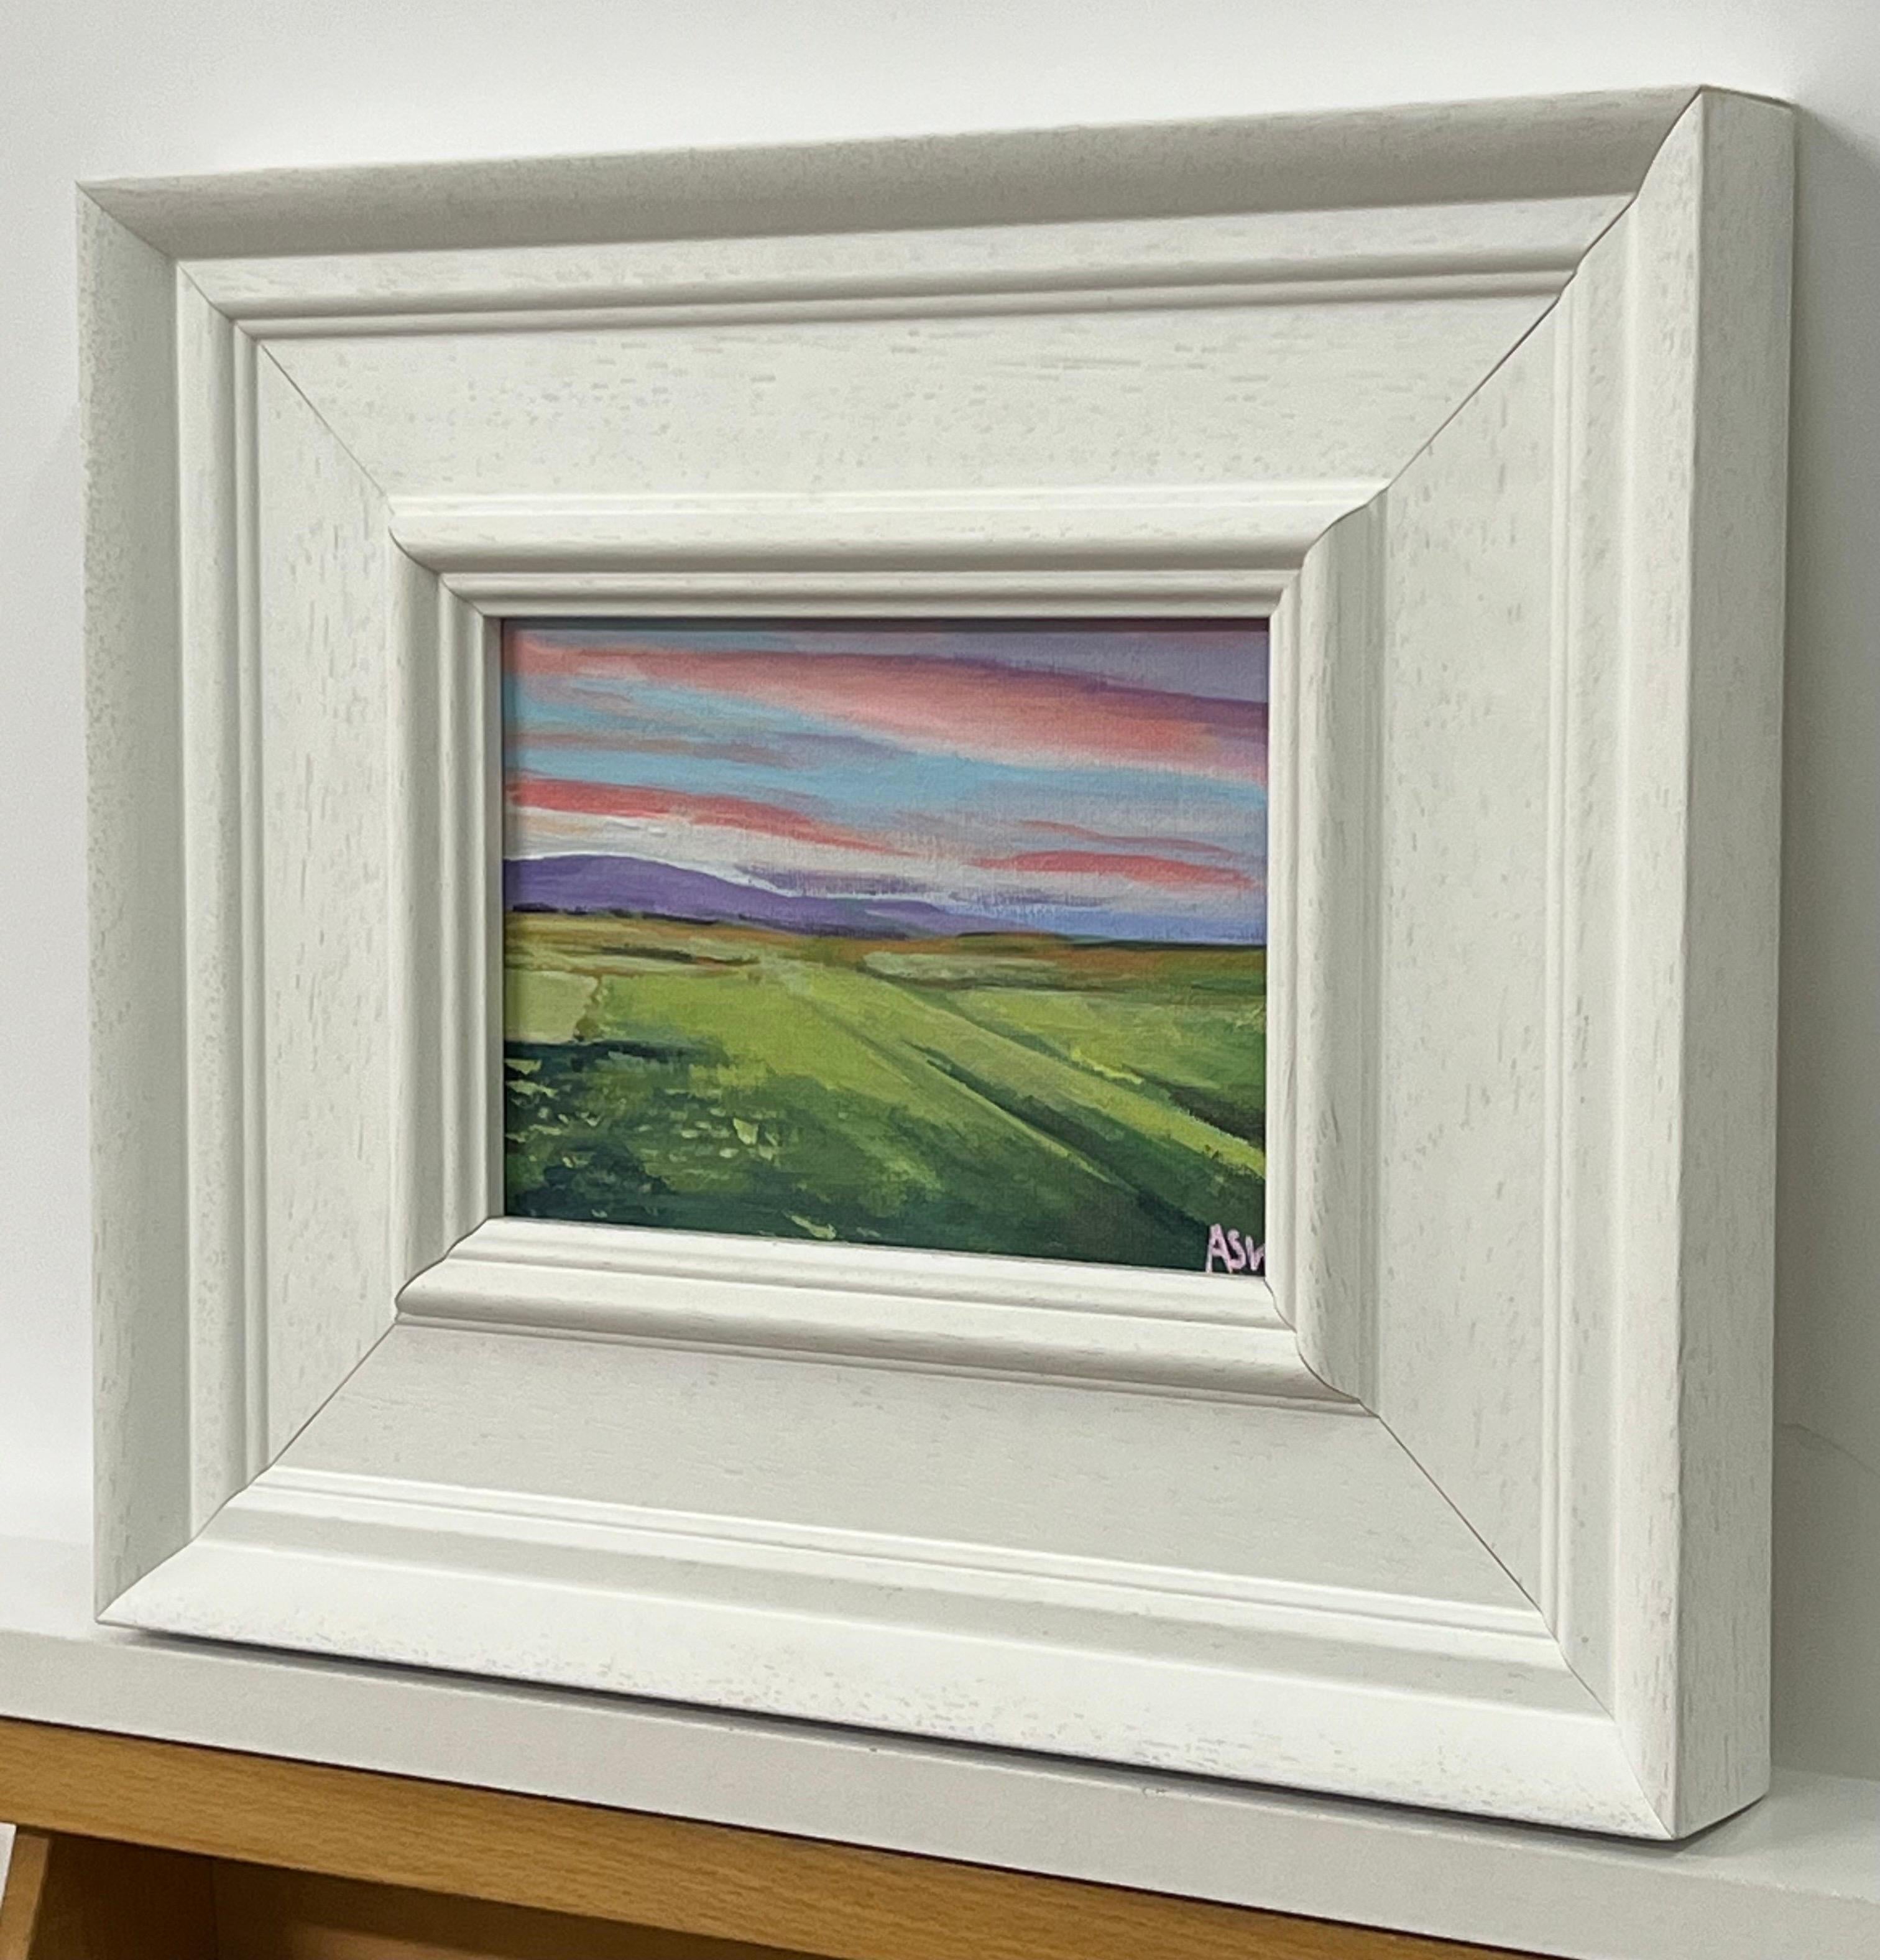 Miniature Landscape of the East Coast of the Scottish Highlands by Contemporary British Artist Angela Wakefield. Brora Beach, Scotland.

Art measures 7 x 5 inches
Frame measures 12 x 10 inches

Angela Wakefield has twice been on the front cover of